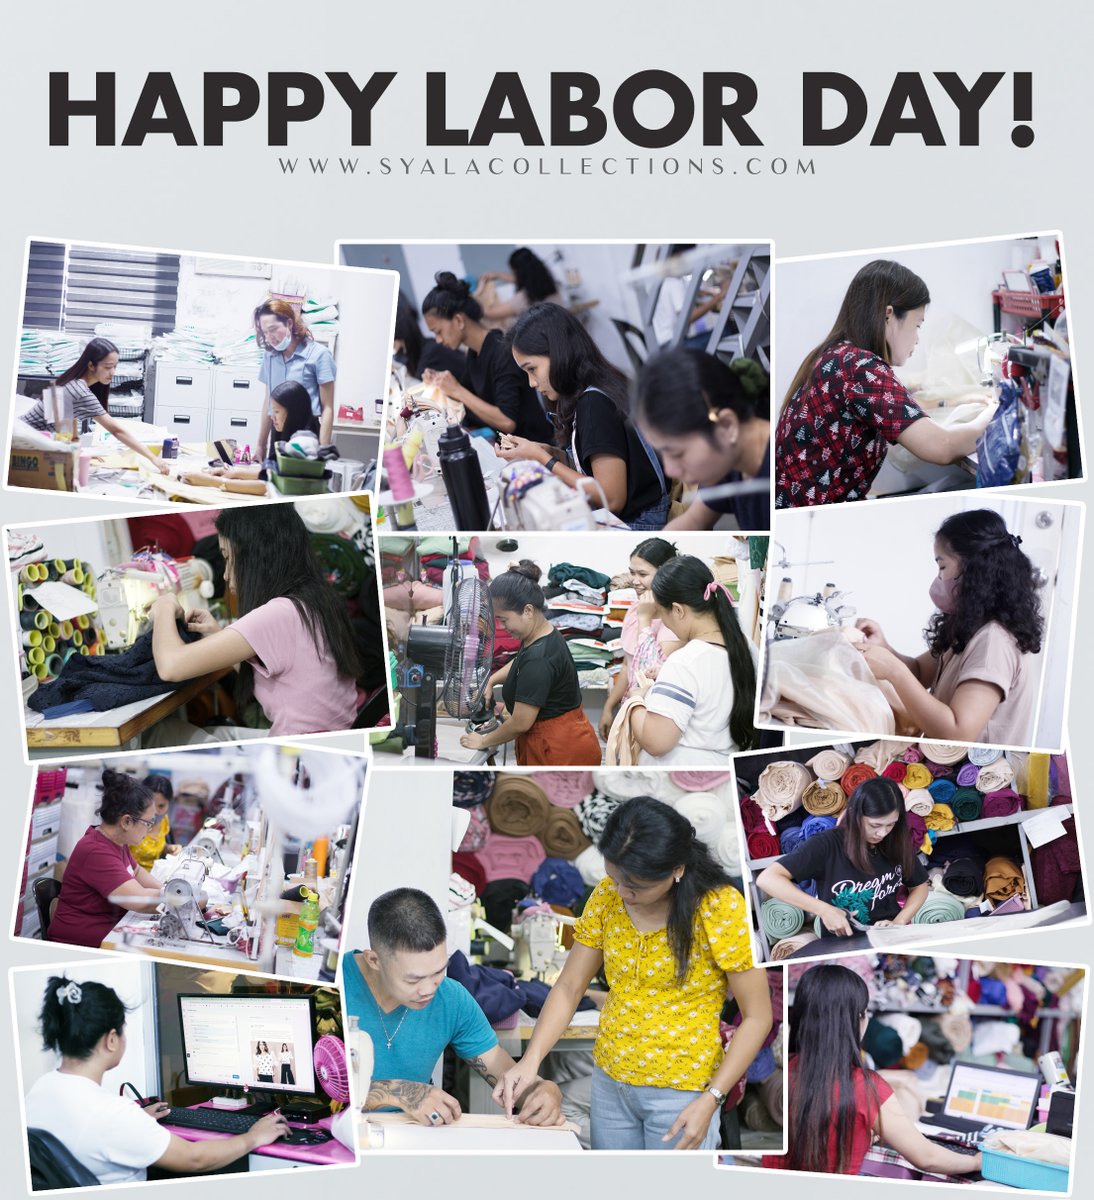 Whatever you do, work at it with all your heart, as working for the Lord. ☝️🙇‍♀️

#laborday
#monthofmay
#syalacollections
#dressph
#production 
#manufacturing 
#designteam
#operations